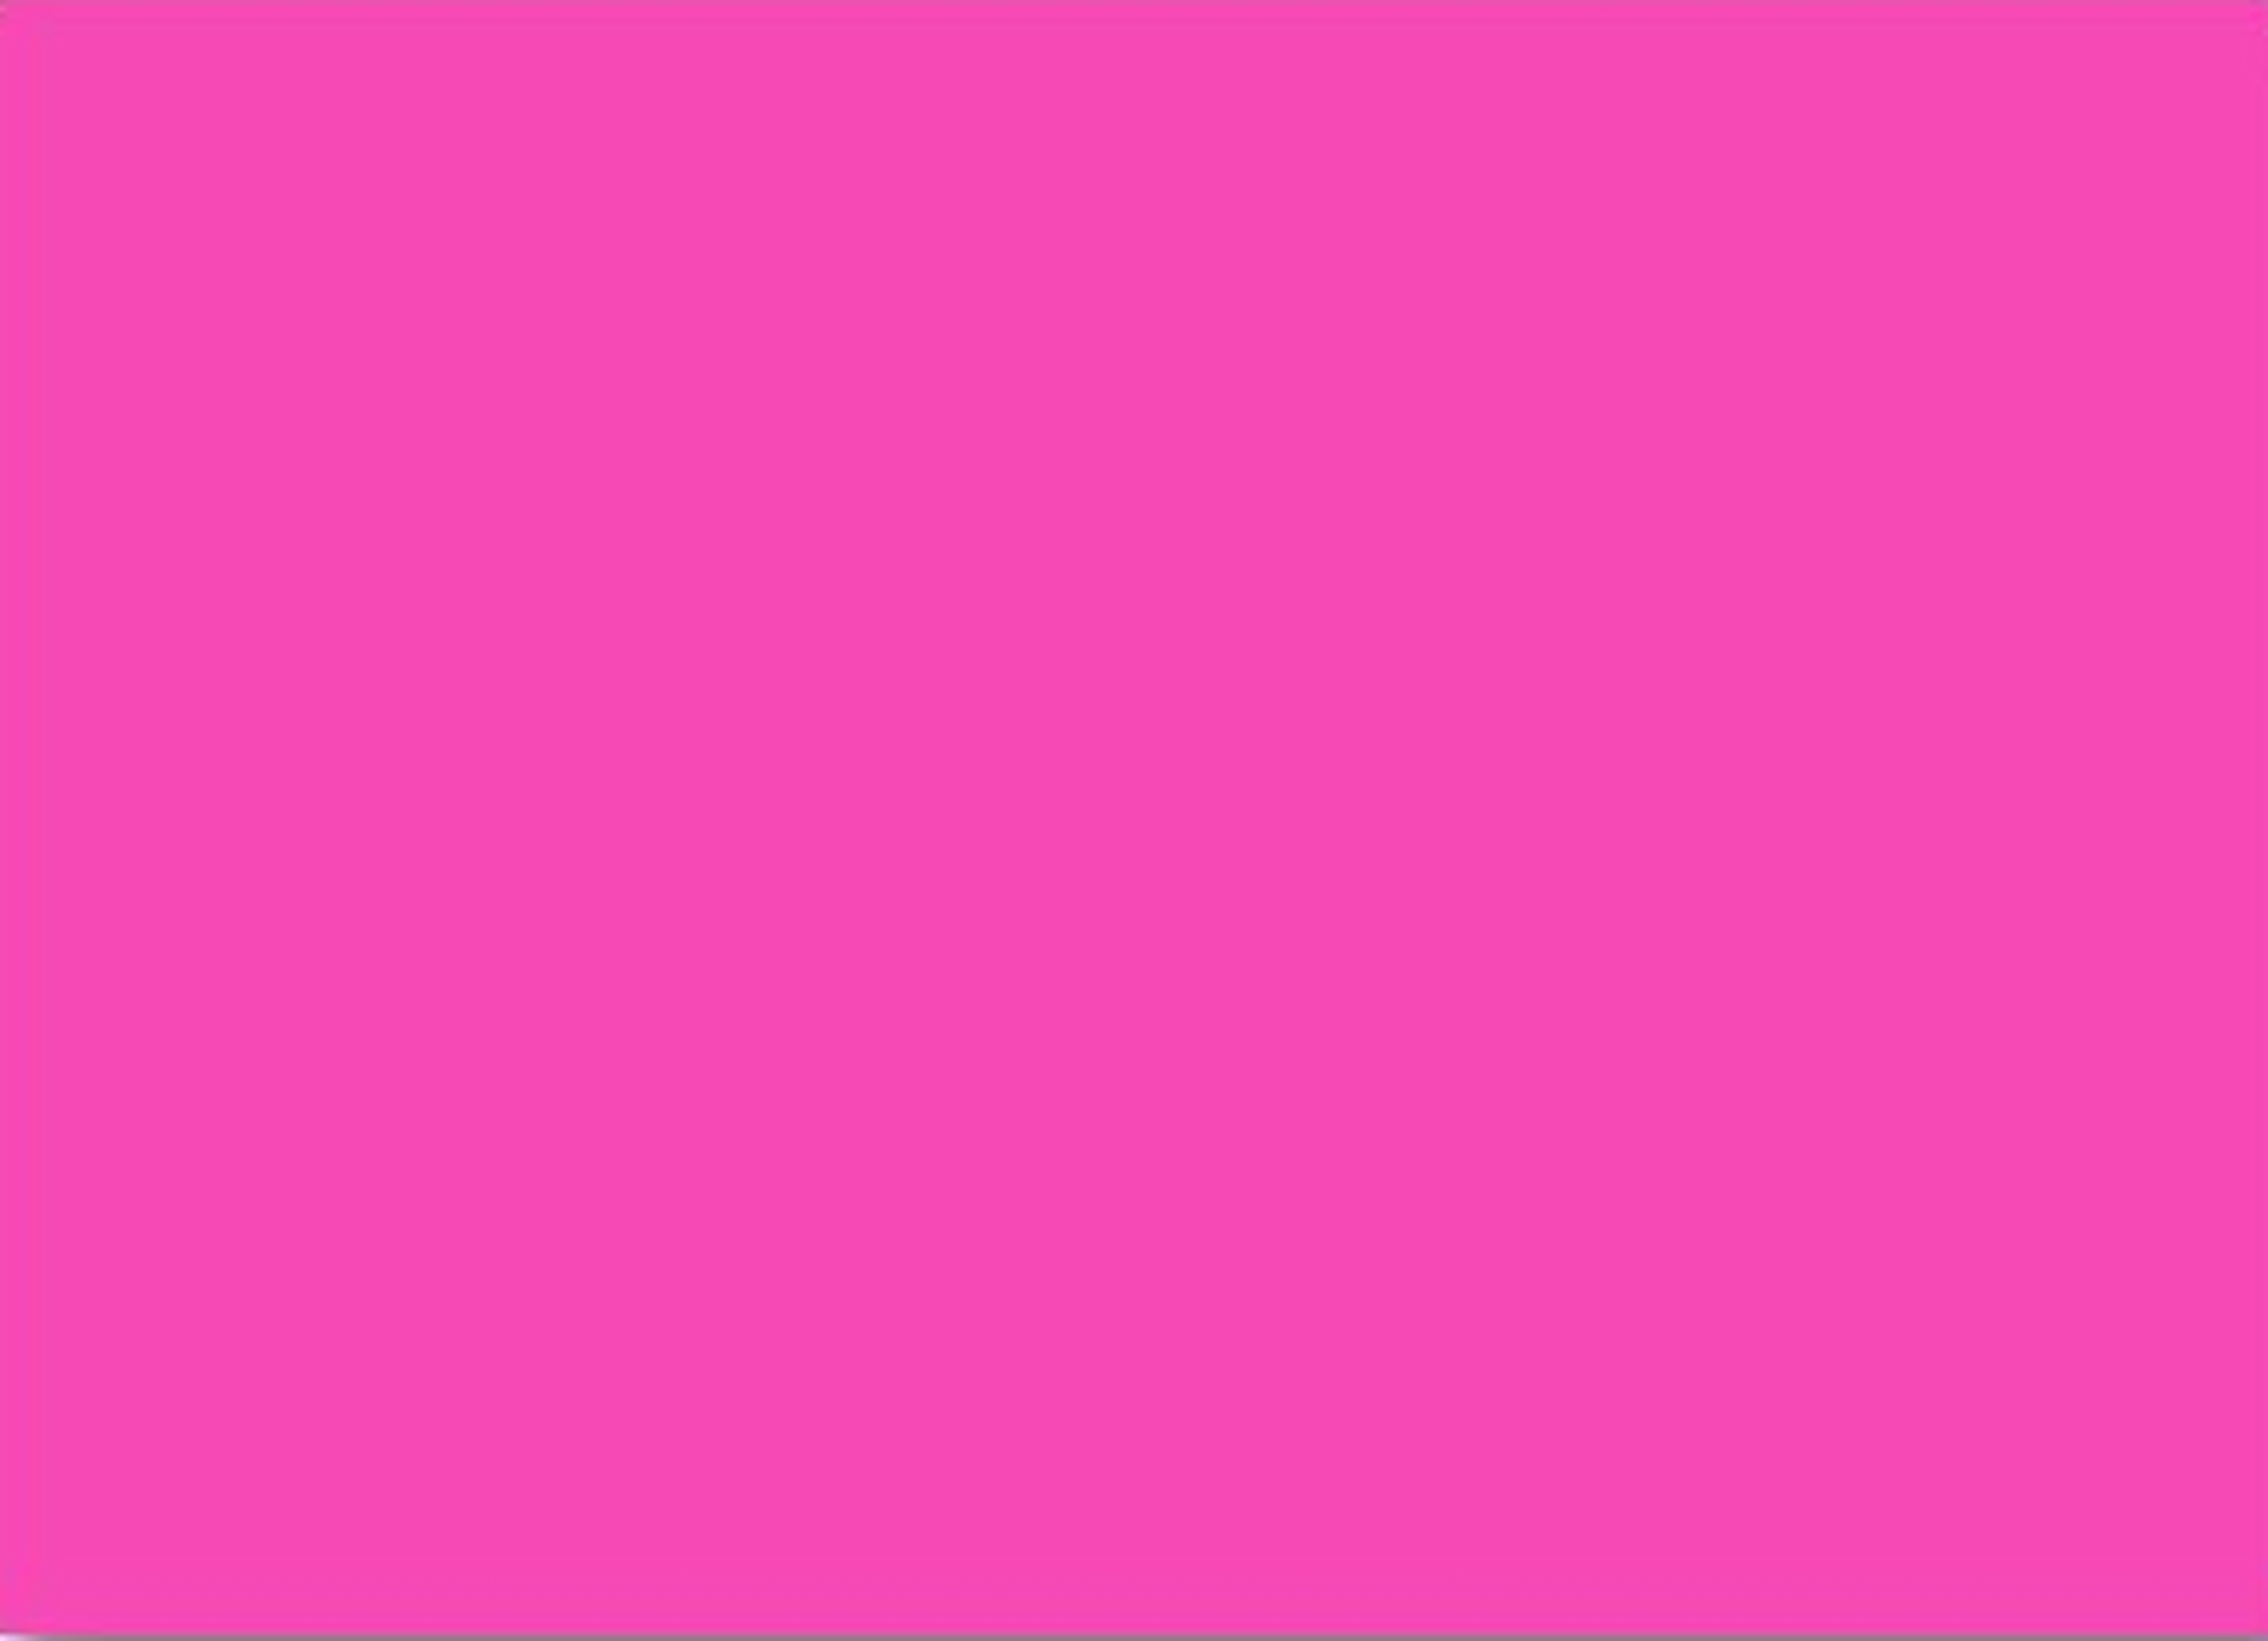 Cool Hot Pink Background With No Watermark Imagegator